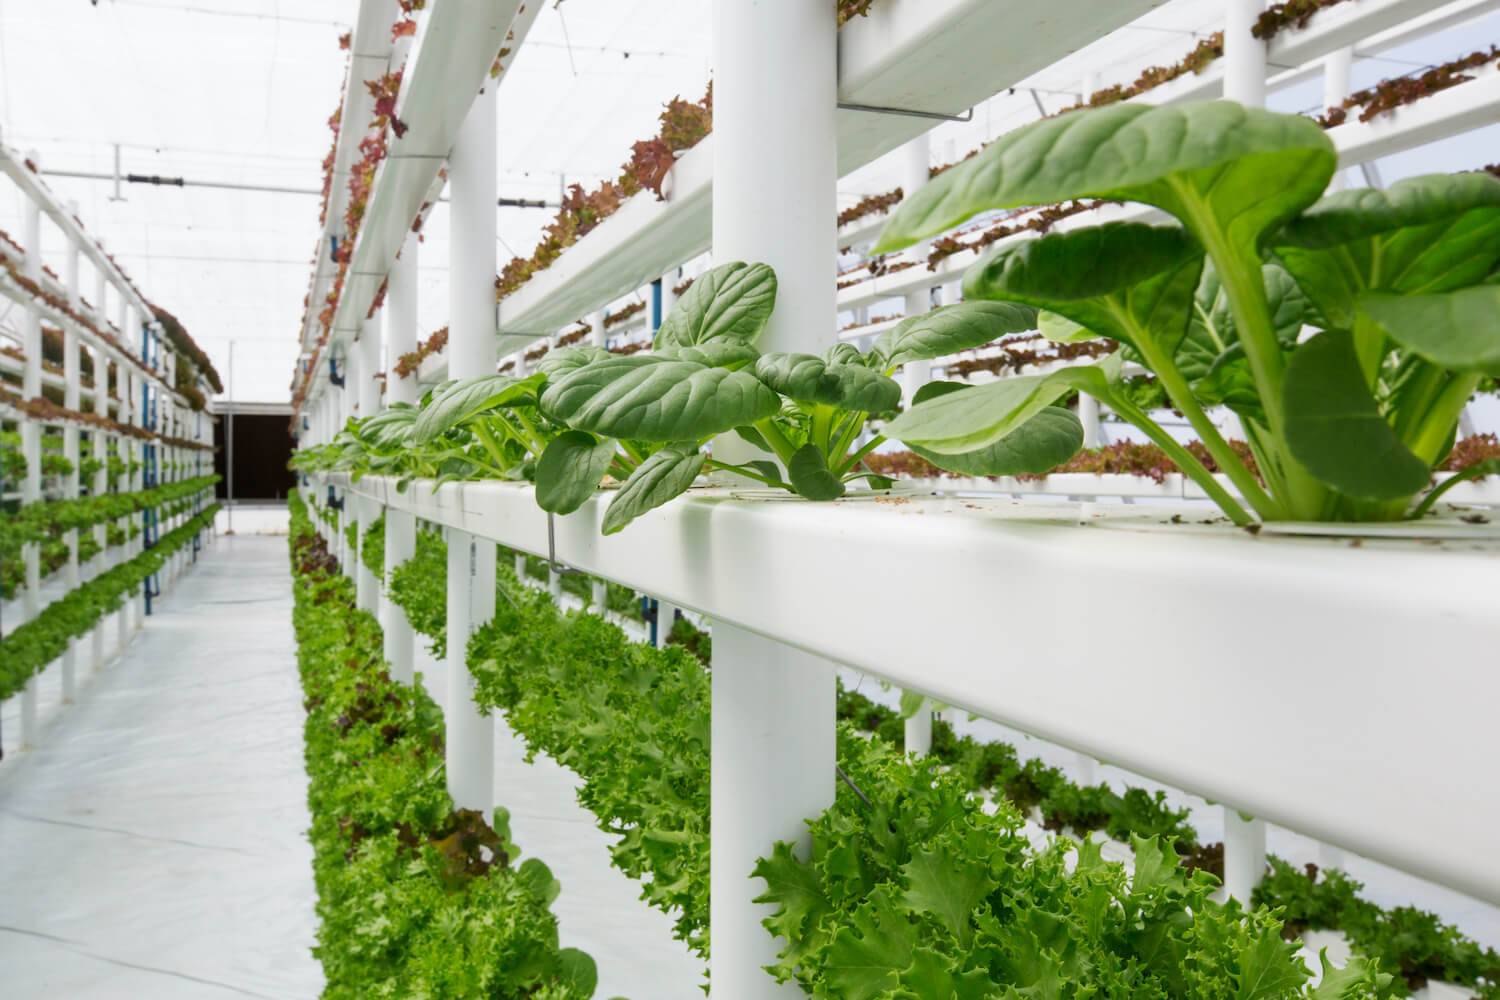 An indoor farm, utilizing hydroponics and vertical farming to maximise production and minimize water usage. September 2020